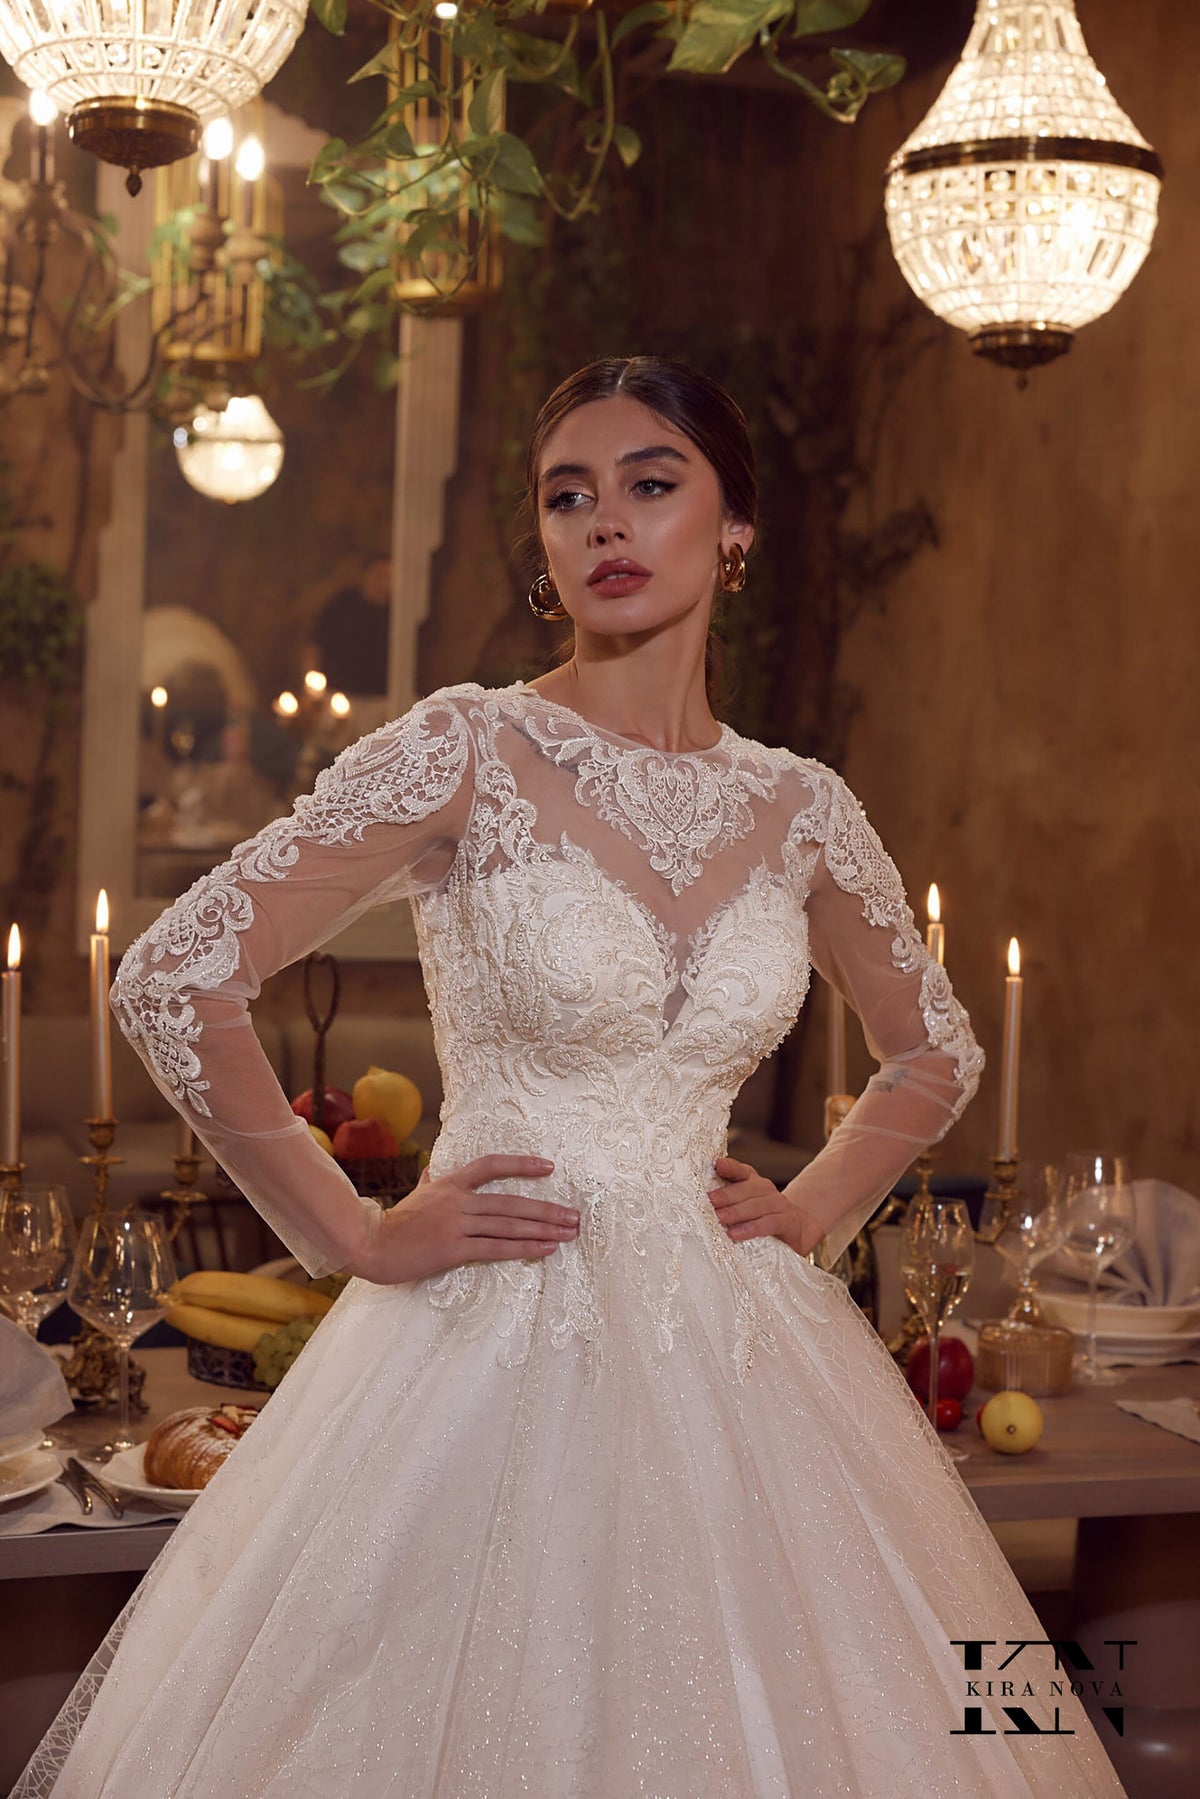 Classic Sparkle Ball Gown Wedding Dress Long Illusion Sleeves Sweetheart Neckline Luxury Bridal Gown Corset Keyhole Back